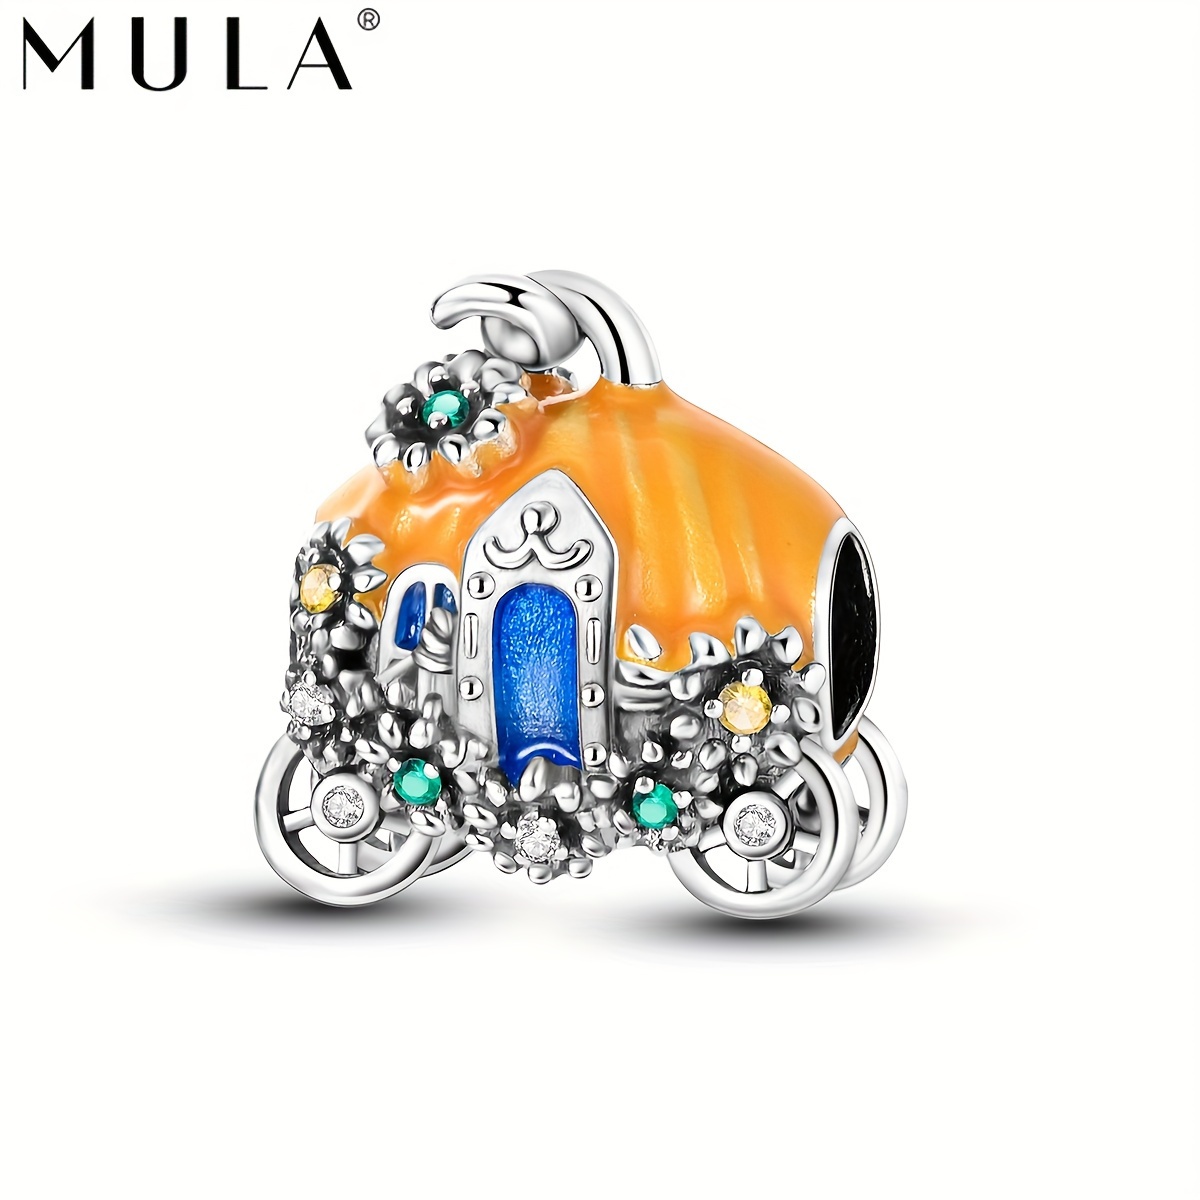 

Mula 925 Silver Plated Creative Yellow Enamel Fairy Tales Pumpkin Carriage Bead Charm Fit Original Bracelet Necklace Diy Jewellery Making Women Surprise Christmas Gift For Girl Friend